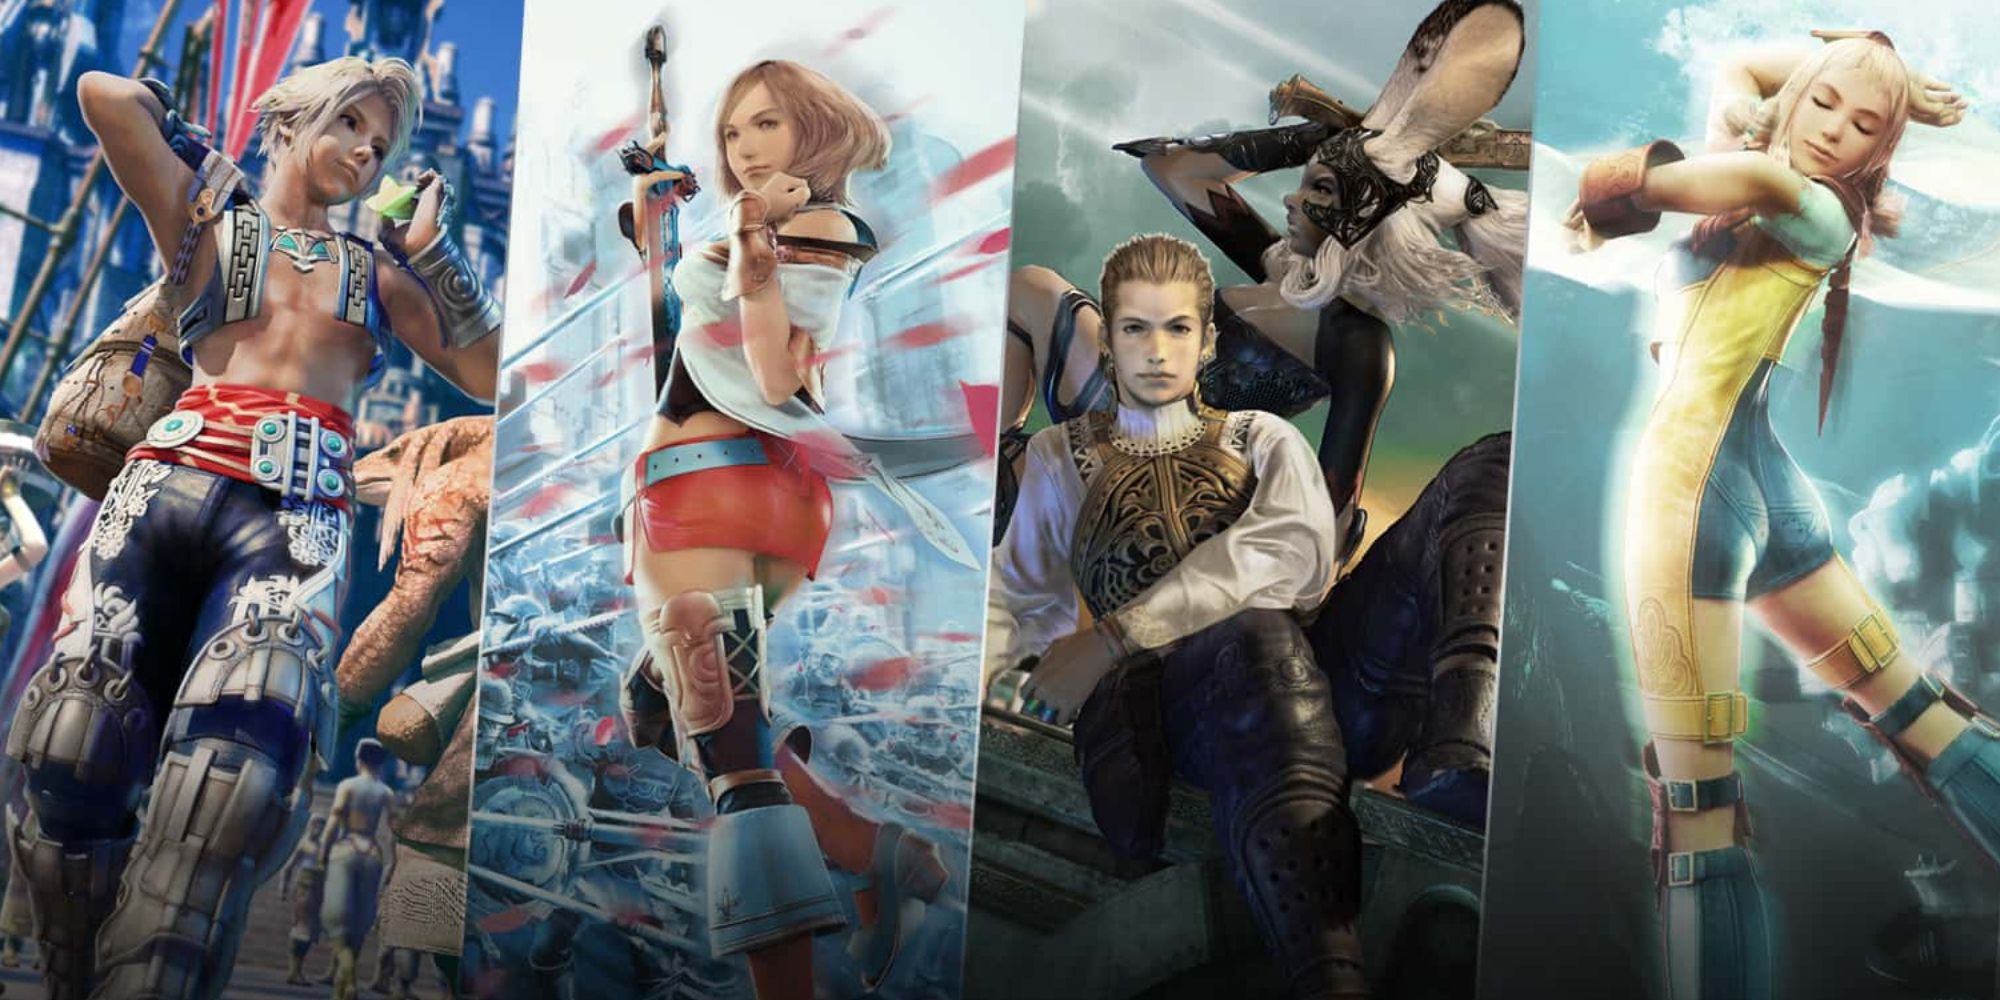 The main cast of Final Fantasy 12; Vaan, Ashe, Balthier, Fran, and Penelo